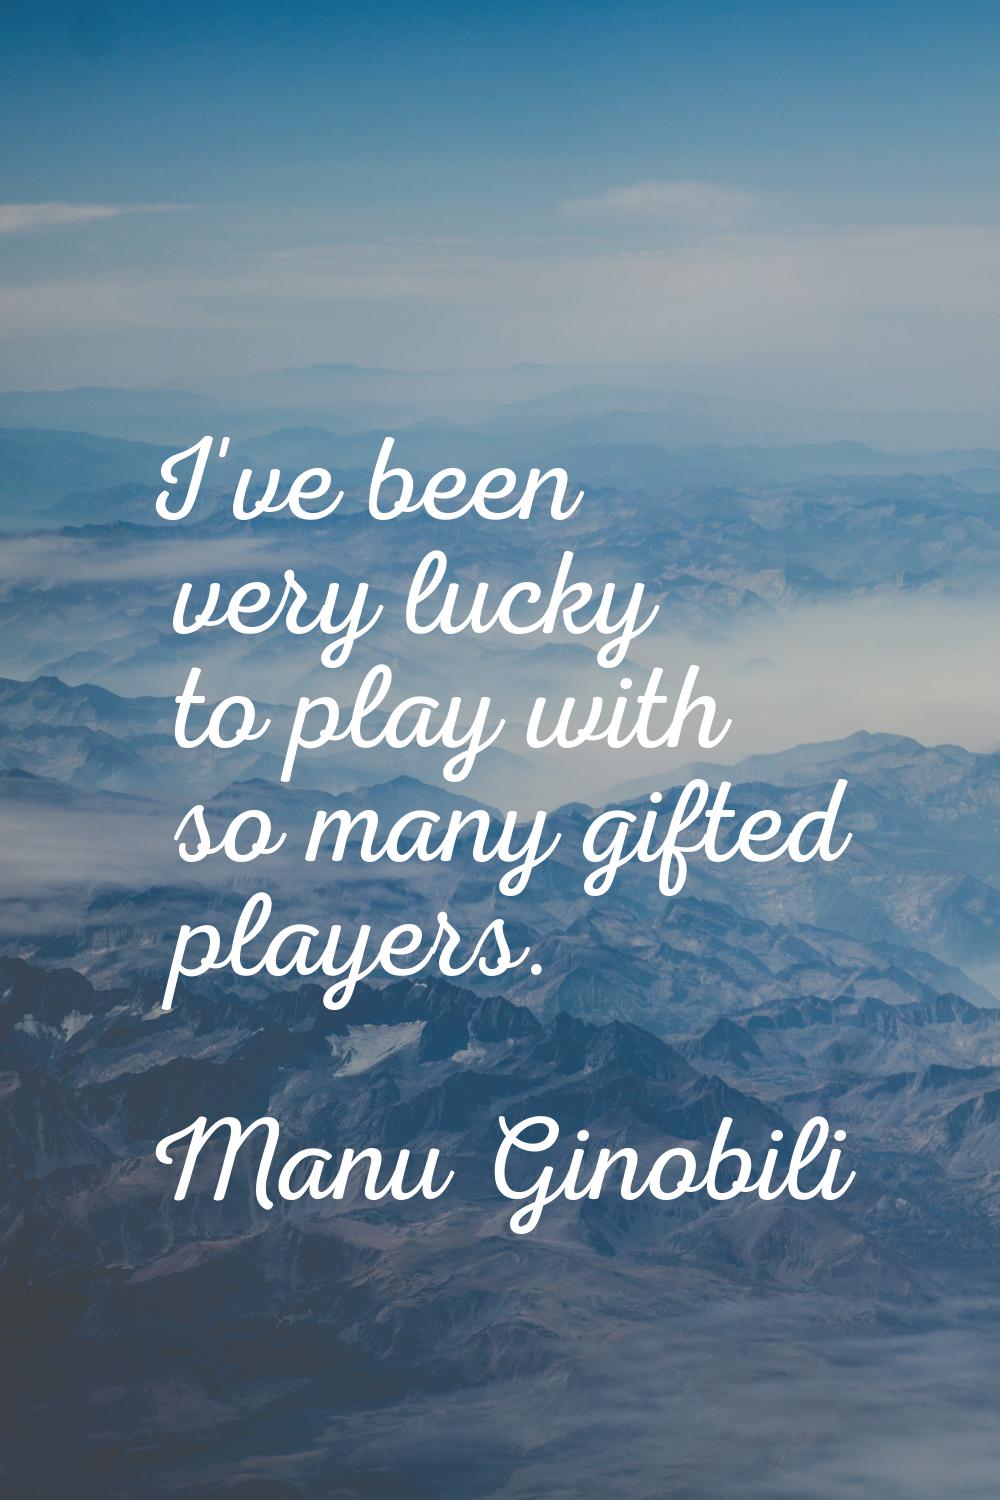 I've been very lucky to play with so many gifted players.